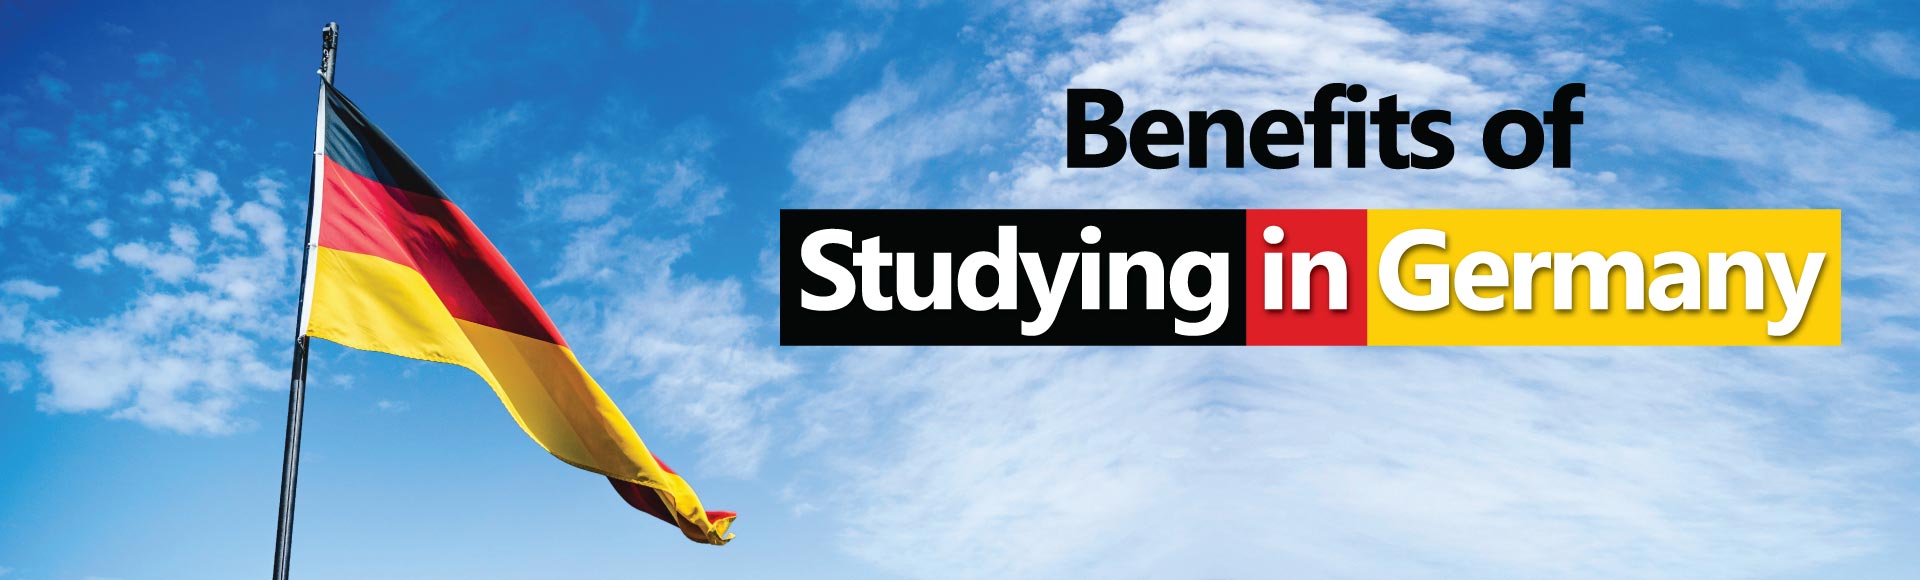 Benefits of study in Germany